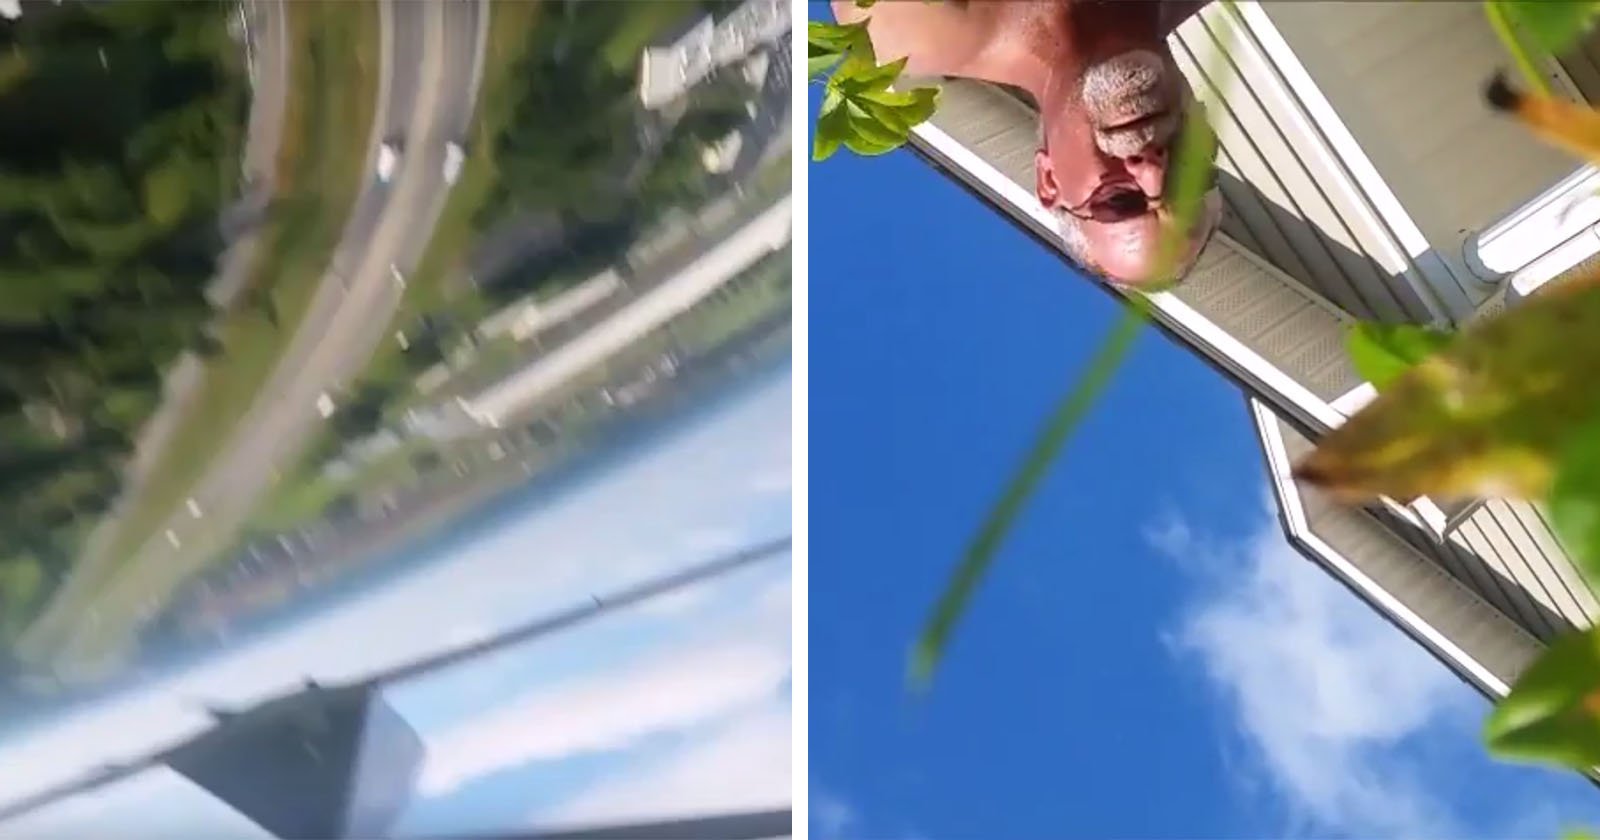 Phone Survives Fall from Plane While Recording, Confuses Man on Ground